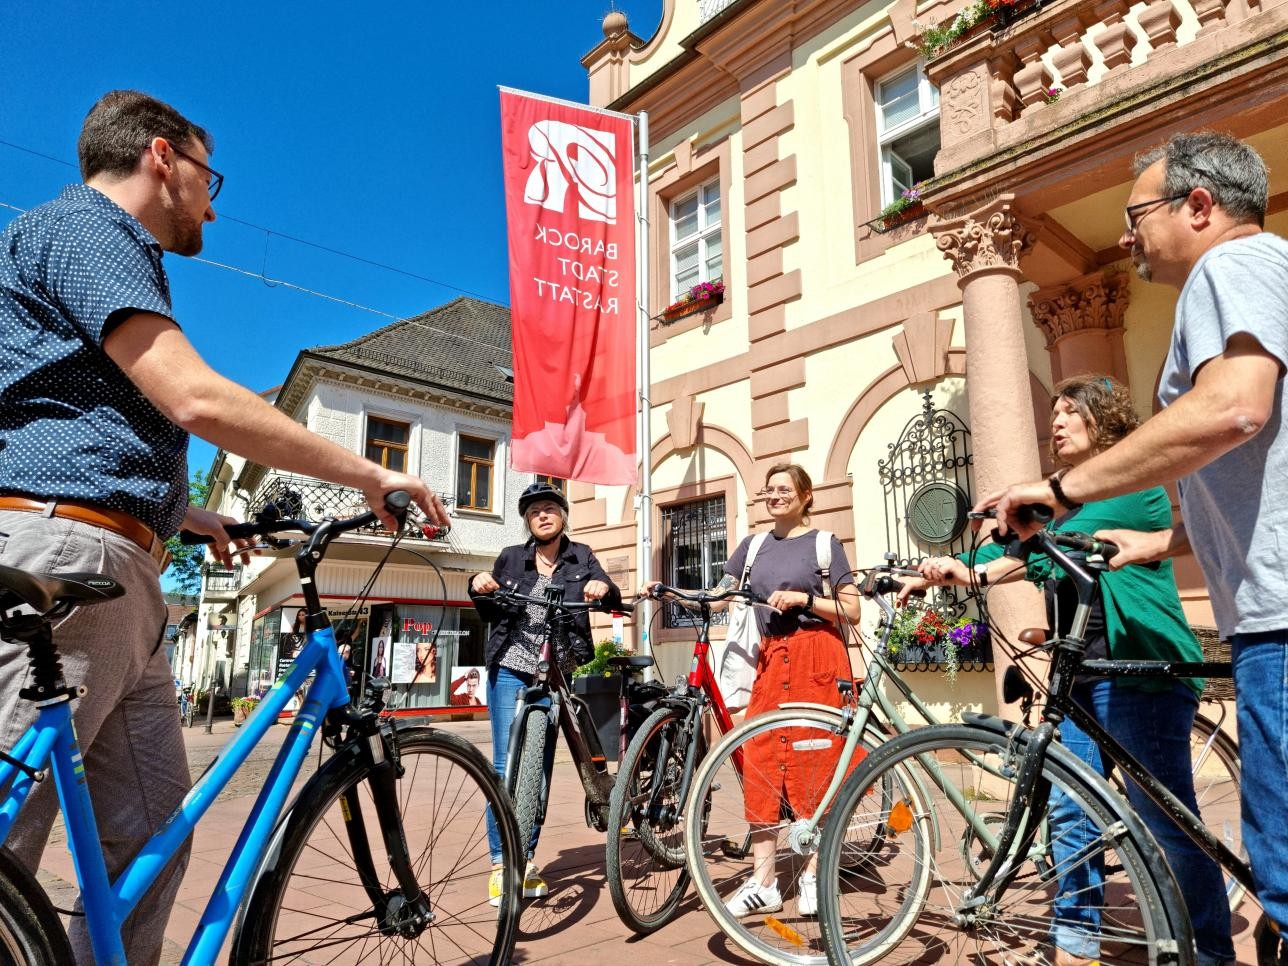 Group of cyclists stand in front of the historic town hall and discuss the route